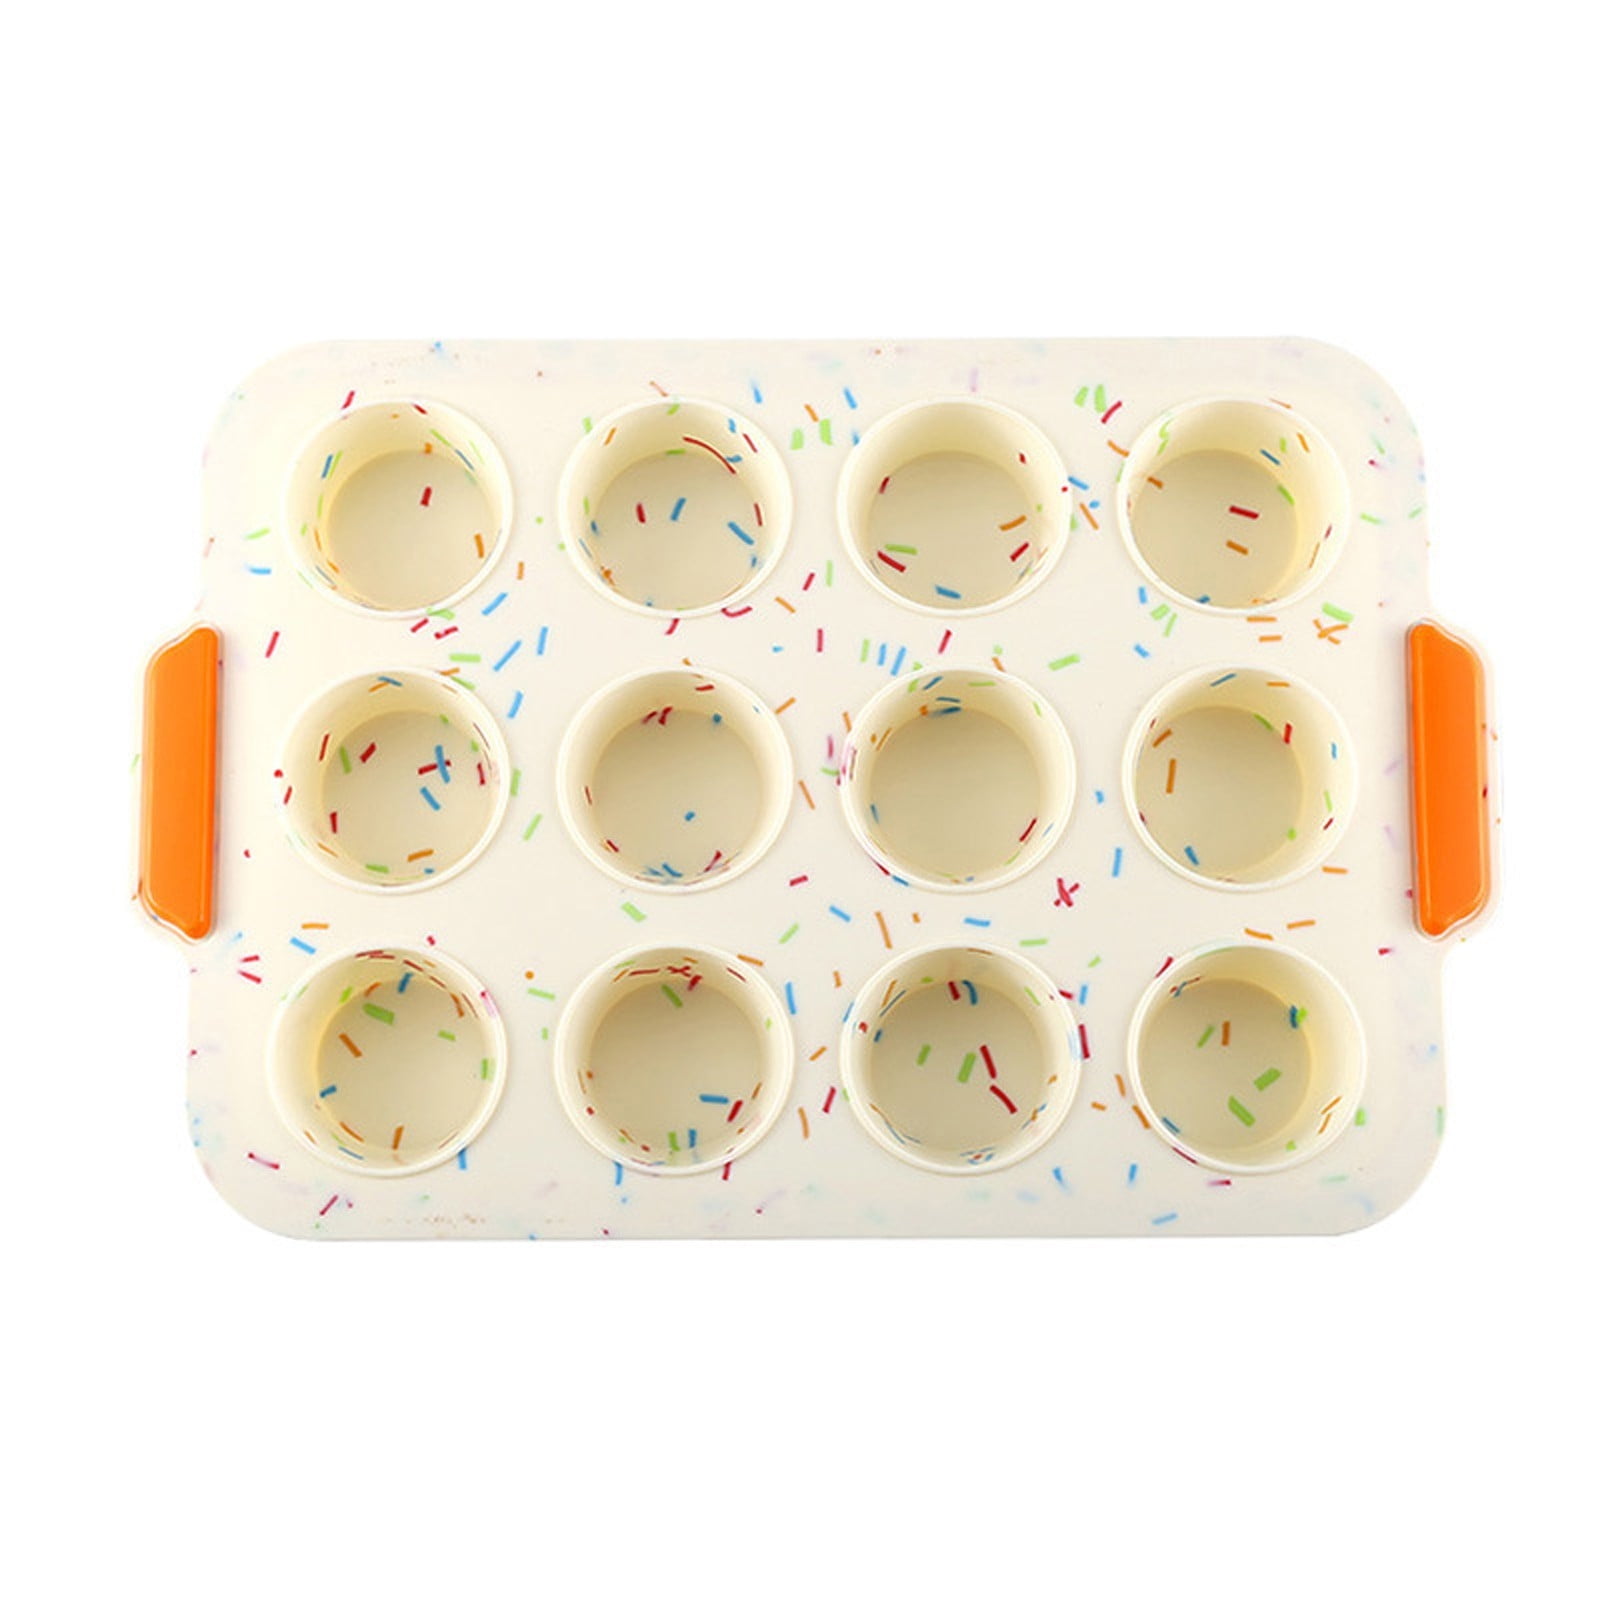  Zerodeko 2pcs Back to School Cake Mold Diy Baking Silicone  Cupcake Muffin Pan Flower Molds Silicone Crayon Molds Silicone Oven Safe  Household Silicone Paper Cup Chocolate Candies Silica Gel: Home 